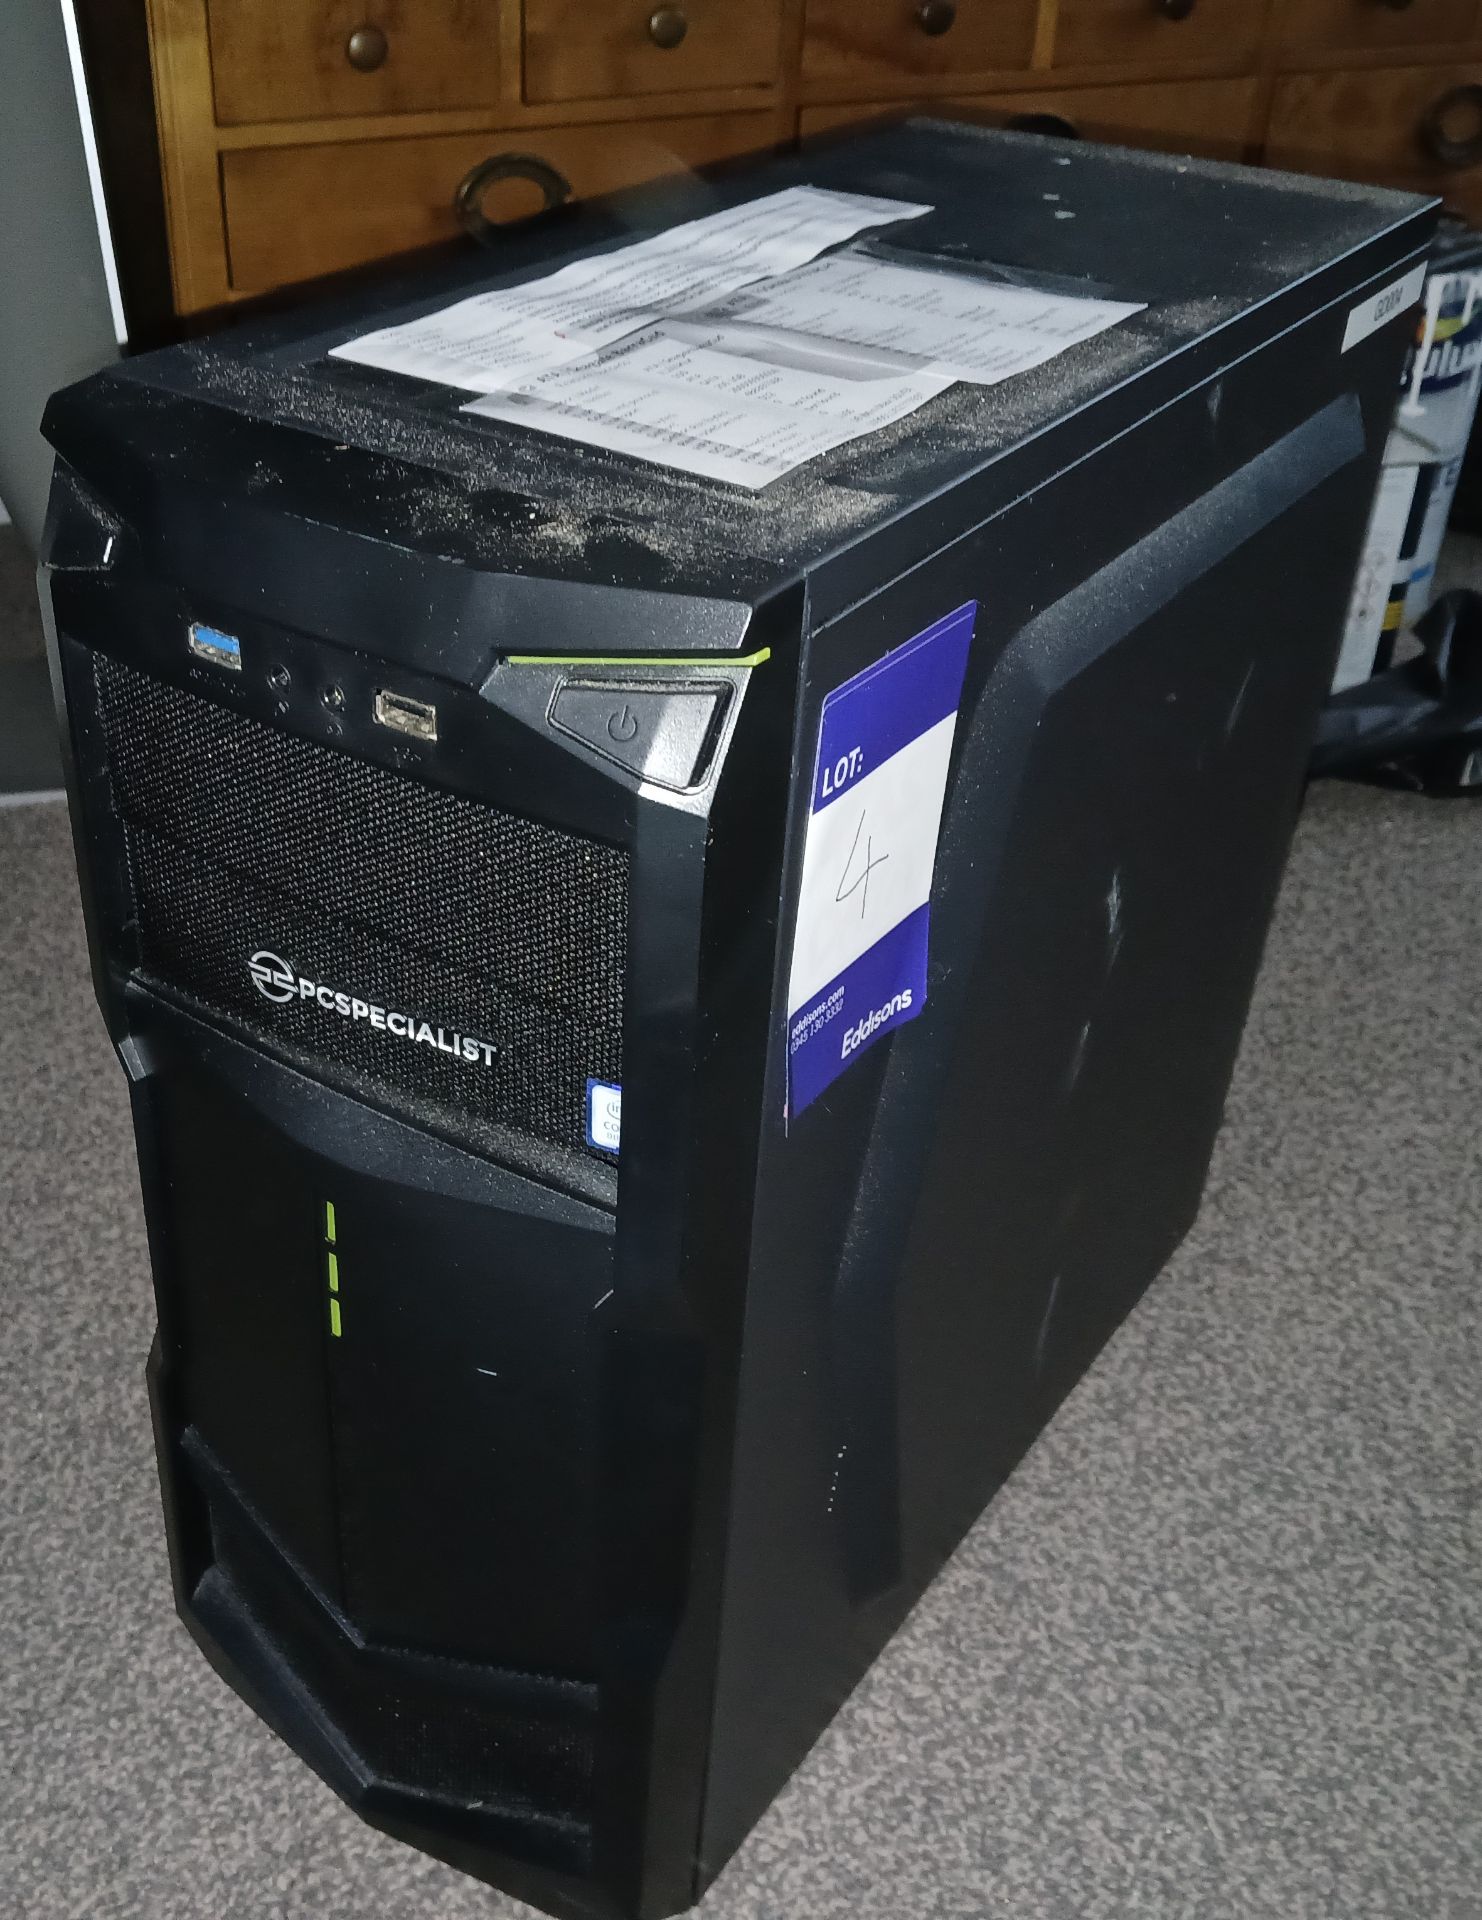 PC Specialist Intel Z370 Desktop Computer (PC only, no mouse, keyboard, or cables – please refer